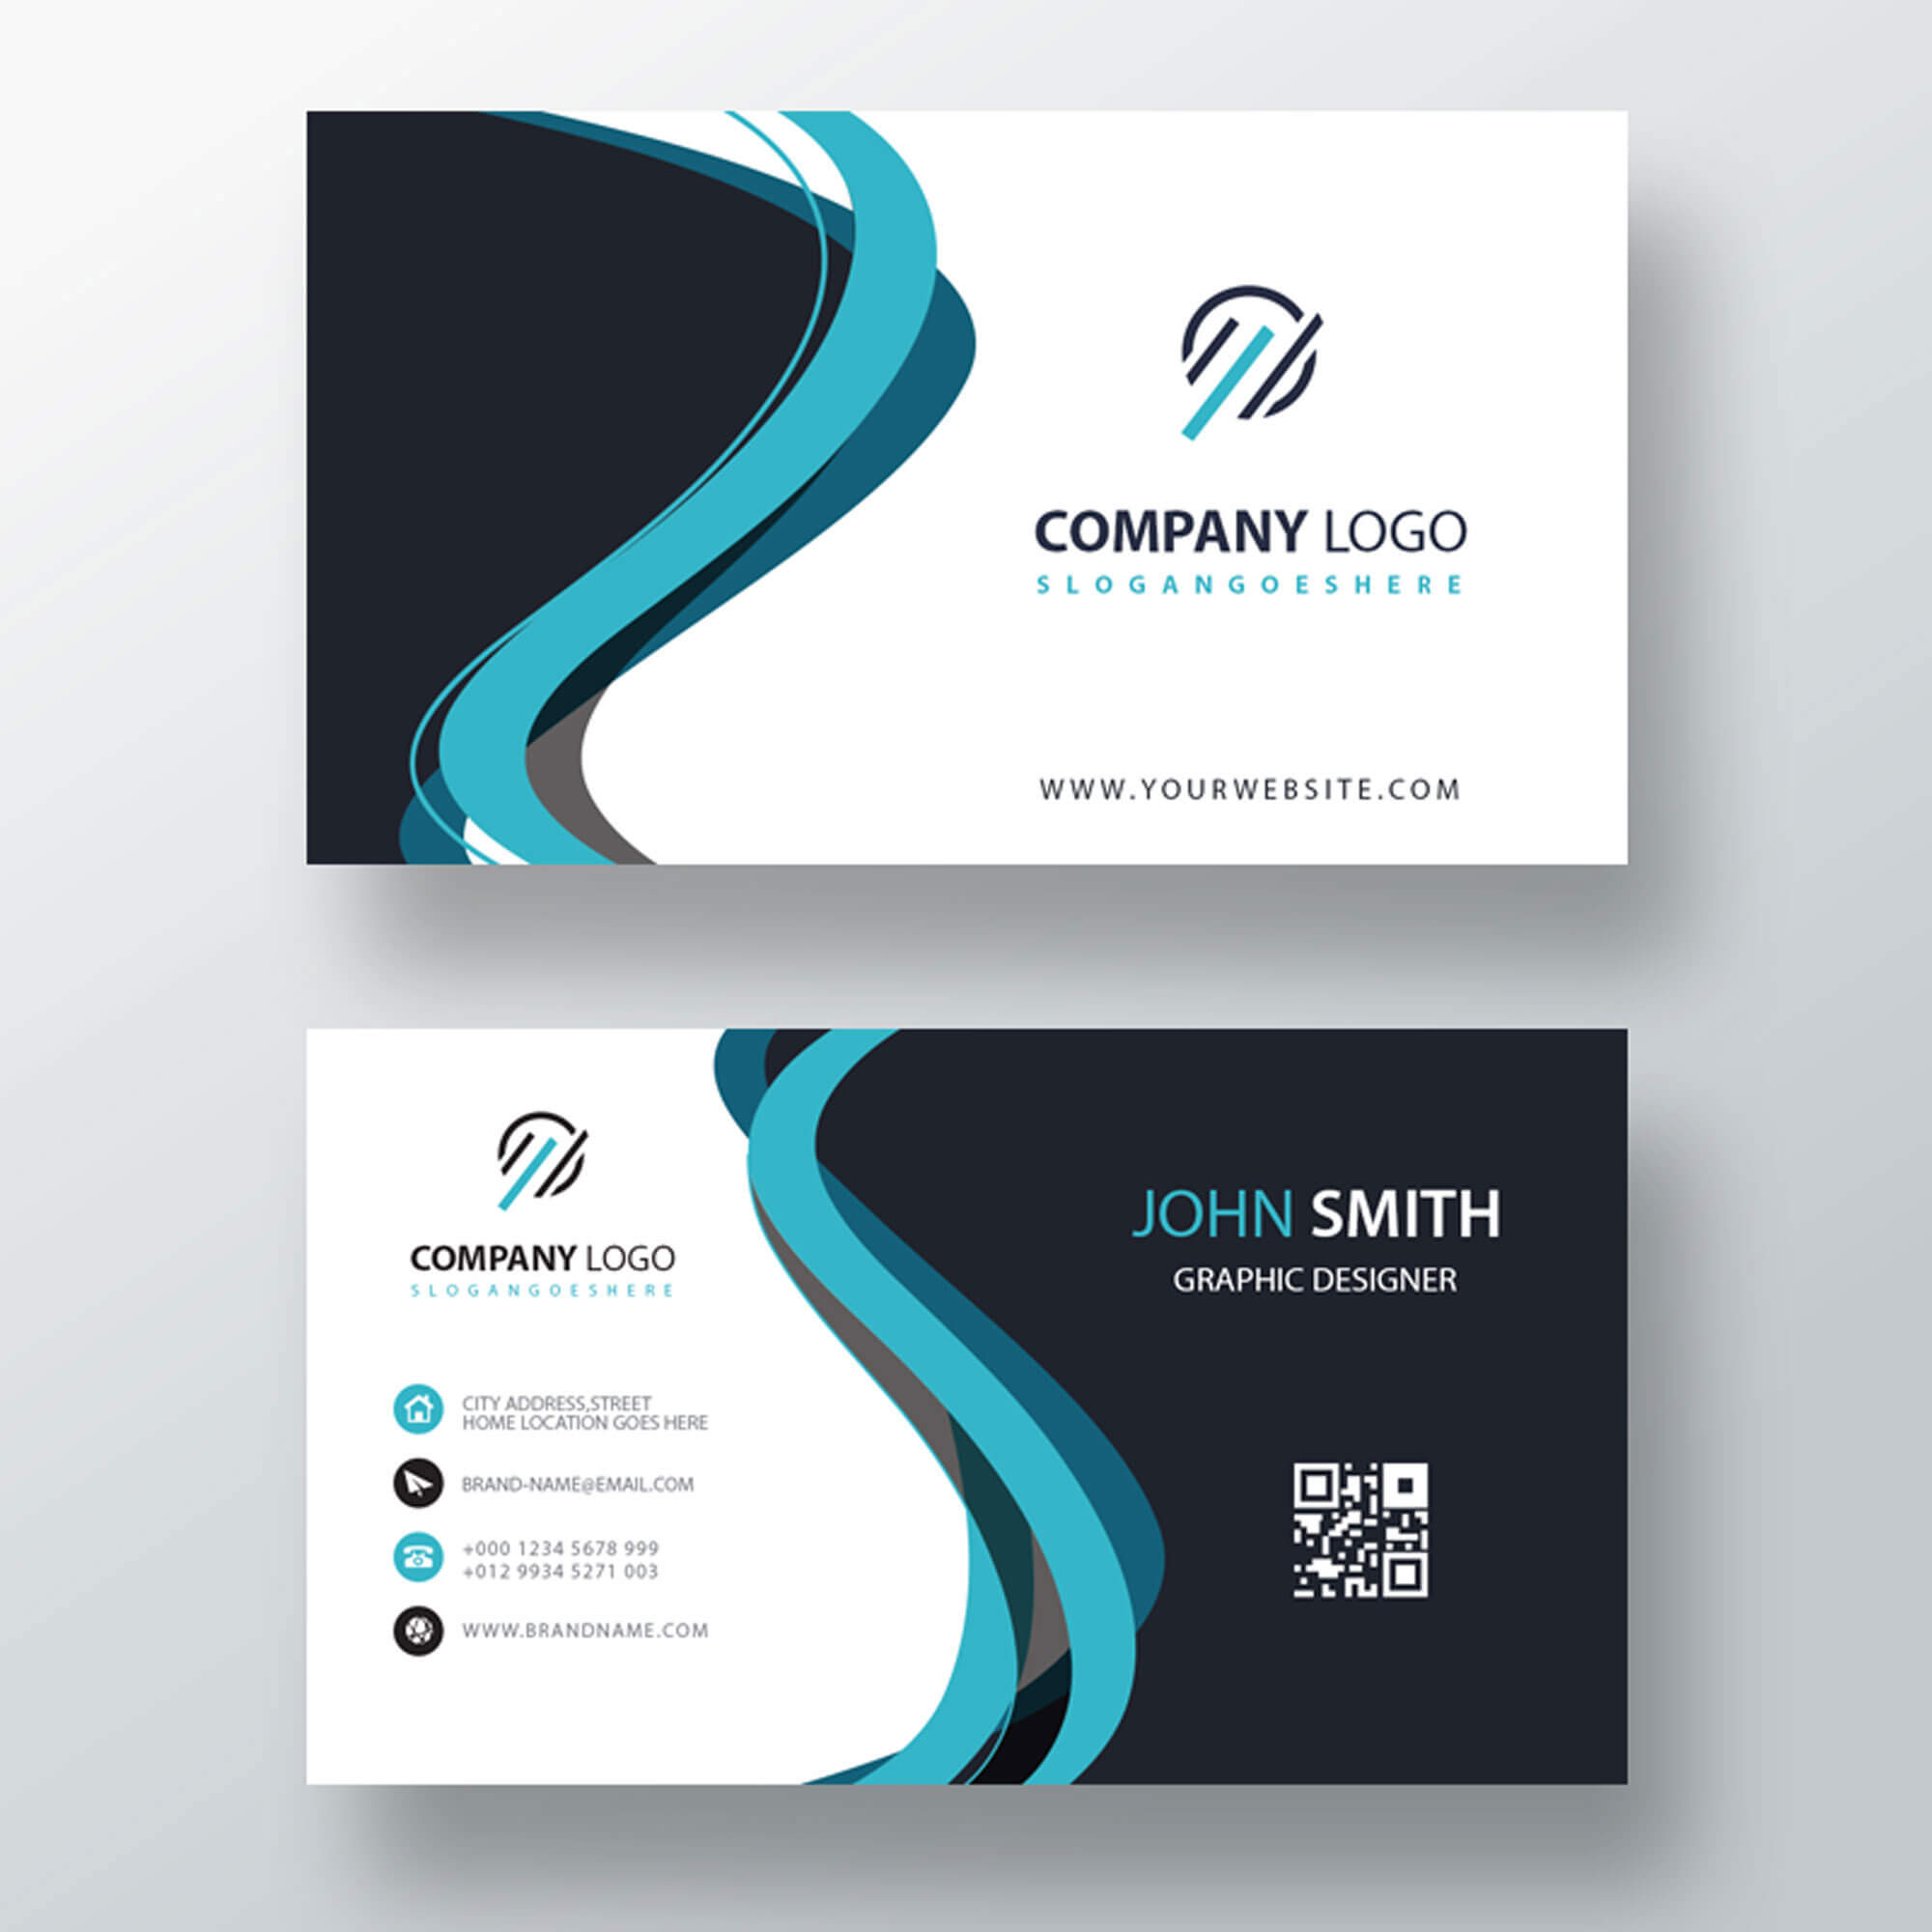 Classic Company Visiting Card Template | Free Customize Throughout Designer Visiting Cards Templates